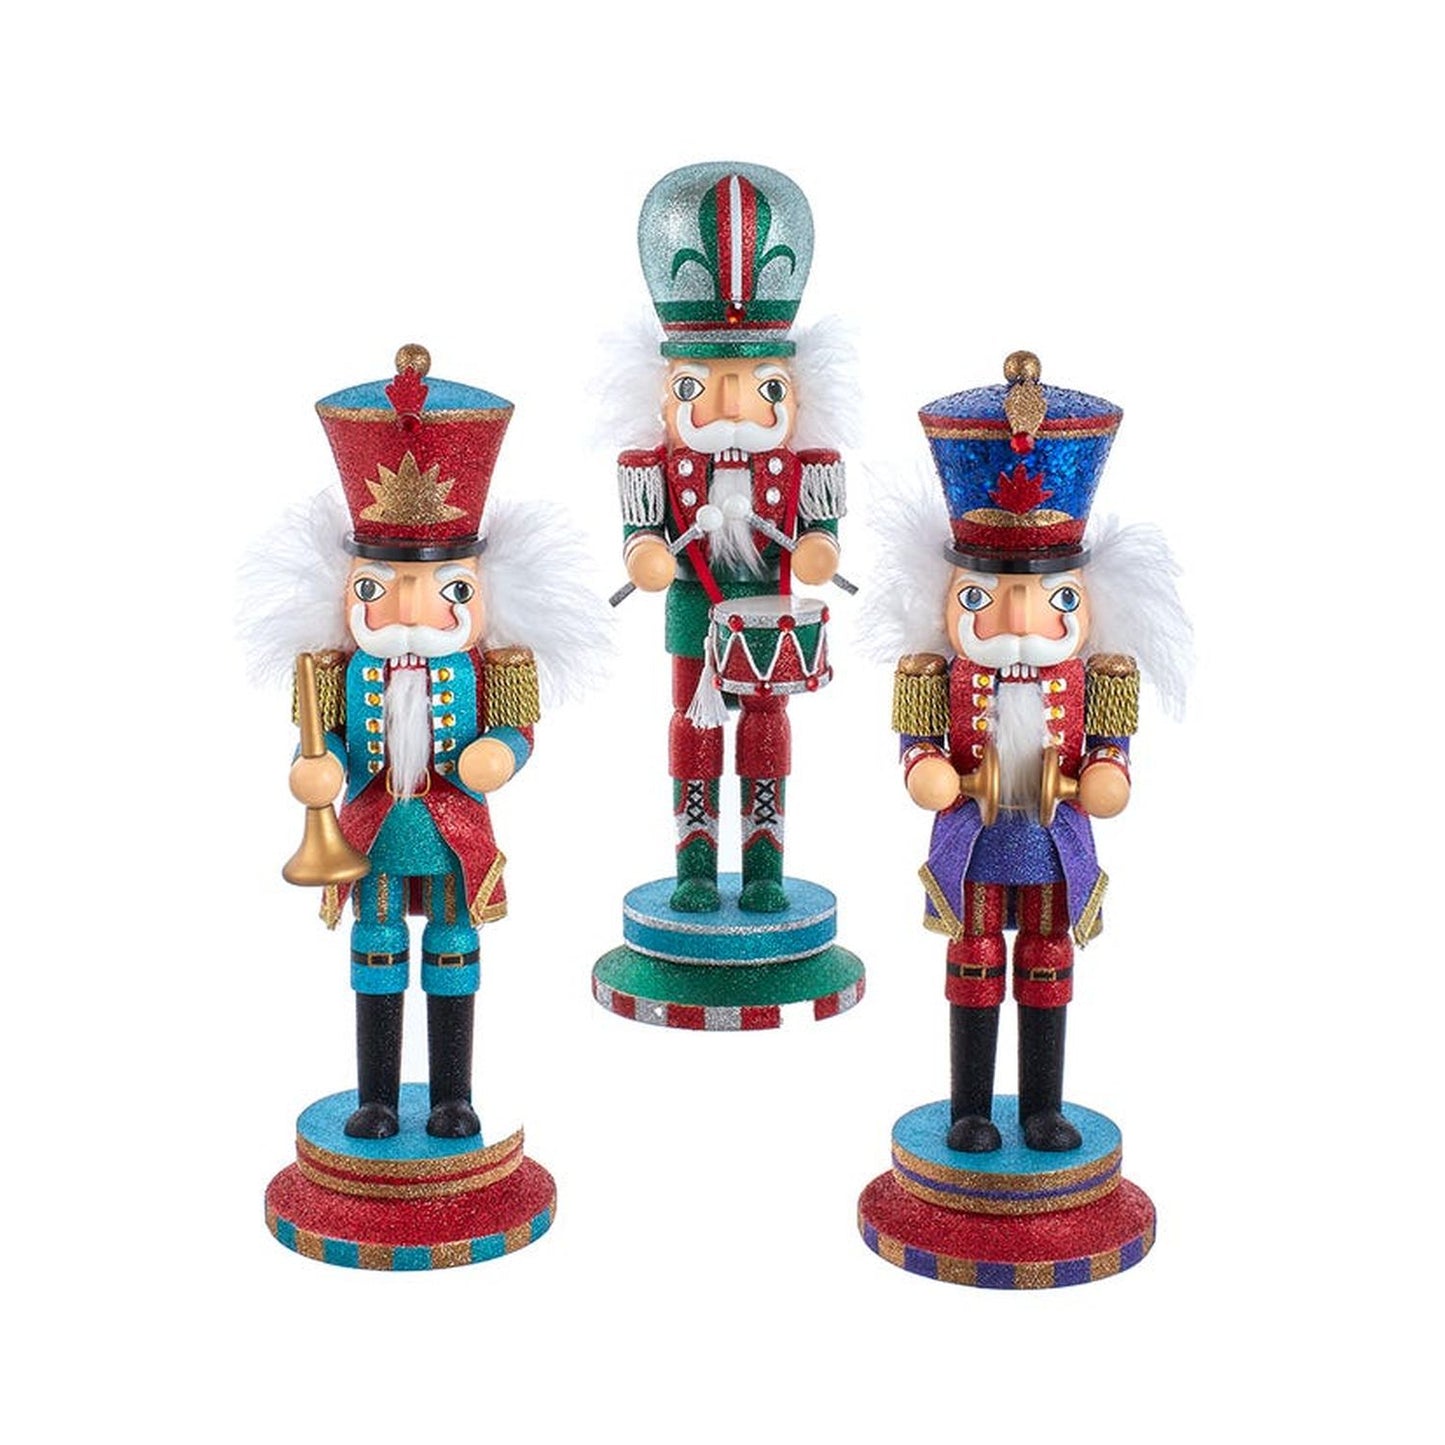 15" Hollywood Nutcrackers Soldiers With Instruments, Set Of 3, Assortment